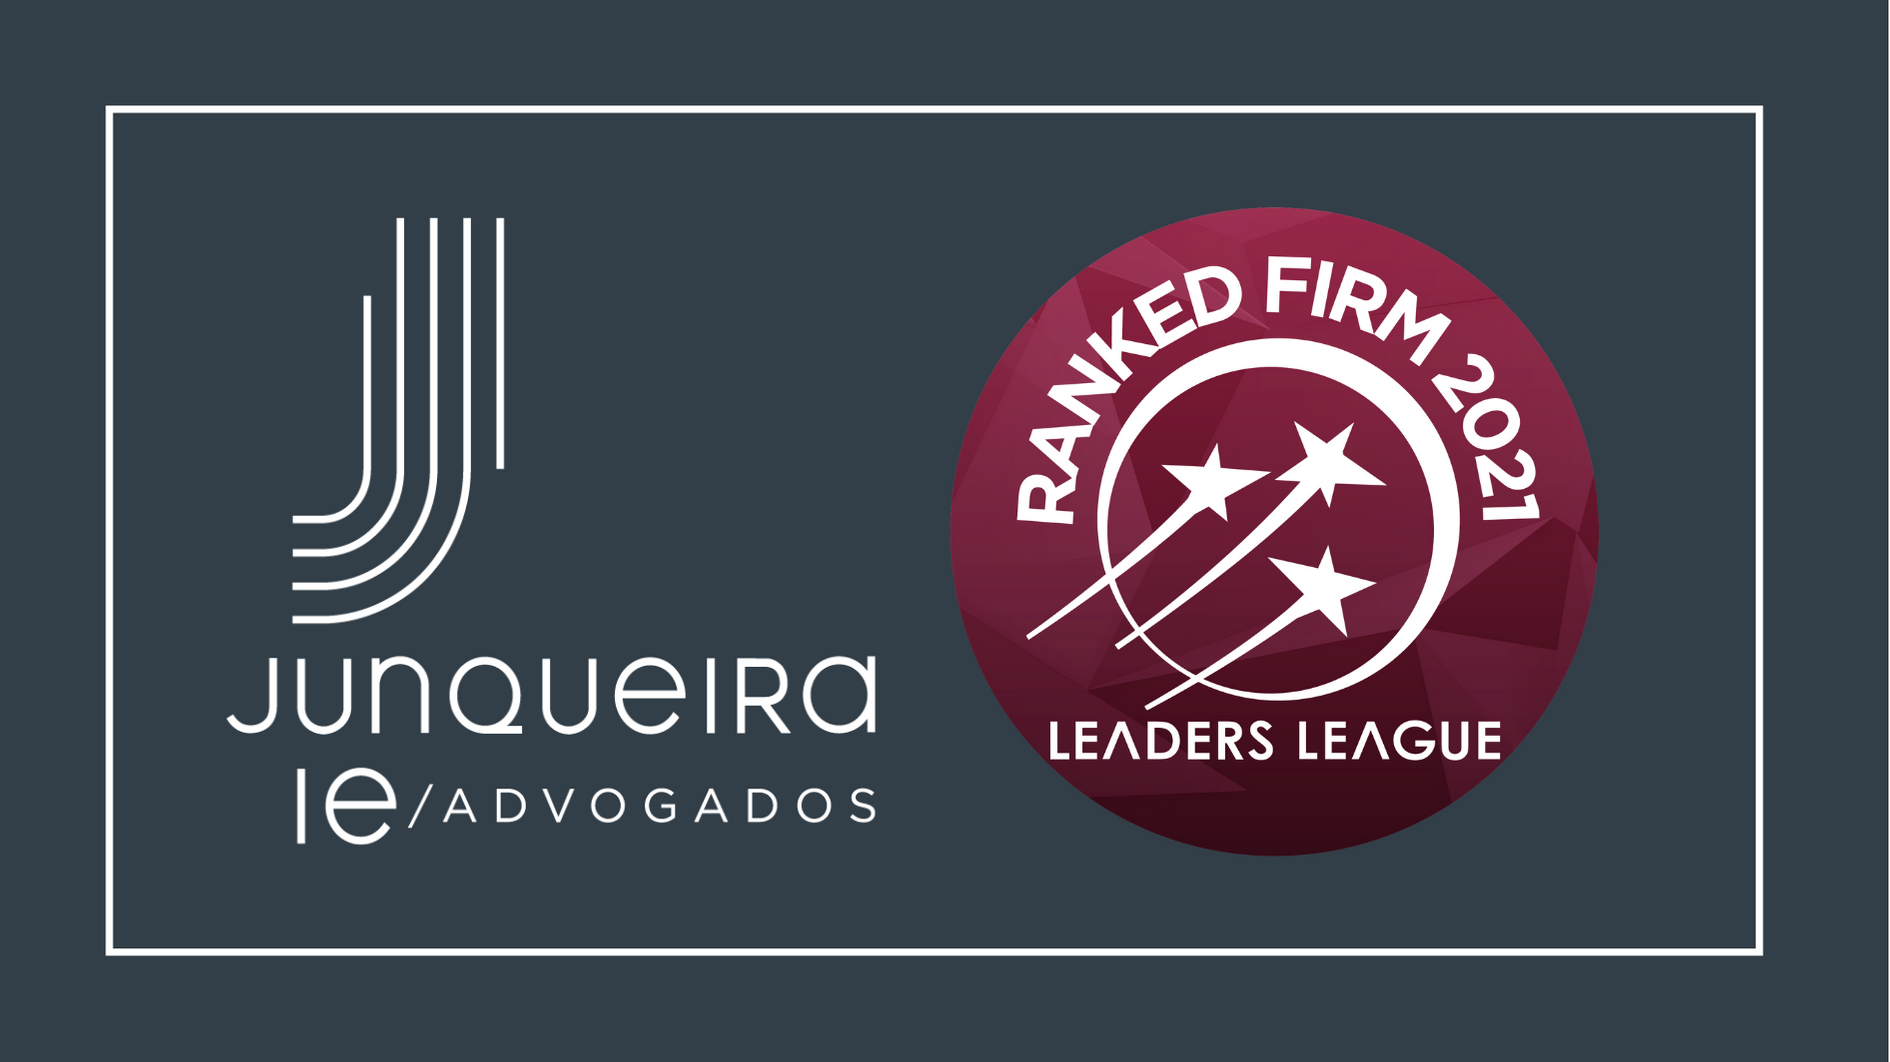 Junqueira Ie Advogados is recognized in Leaders League 2021